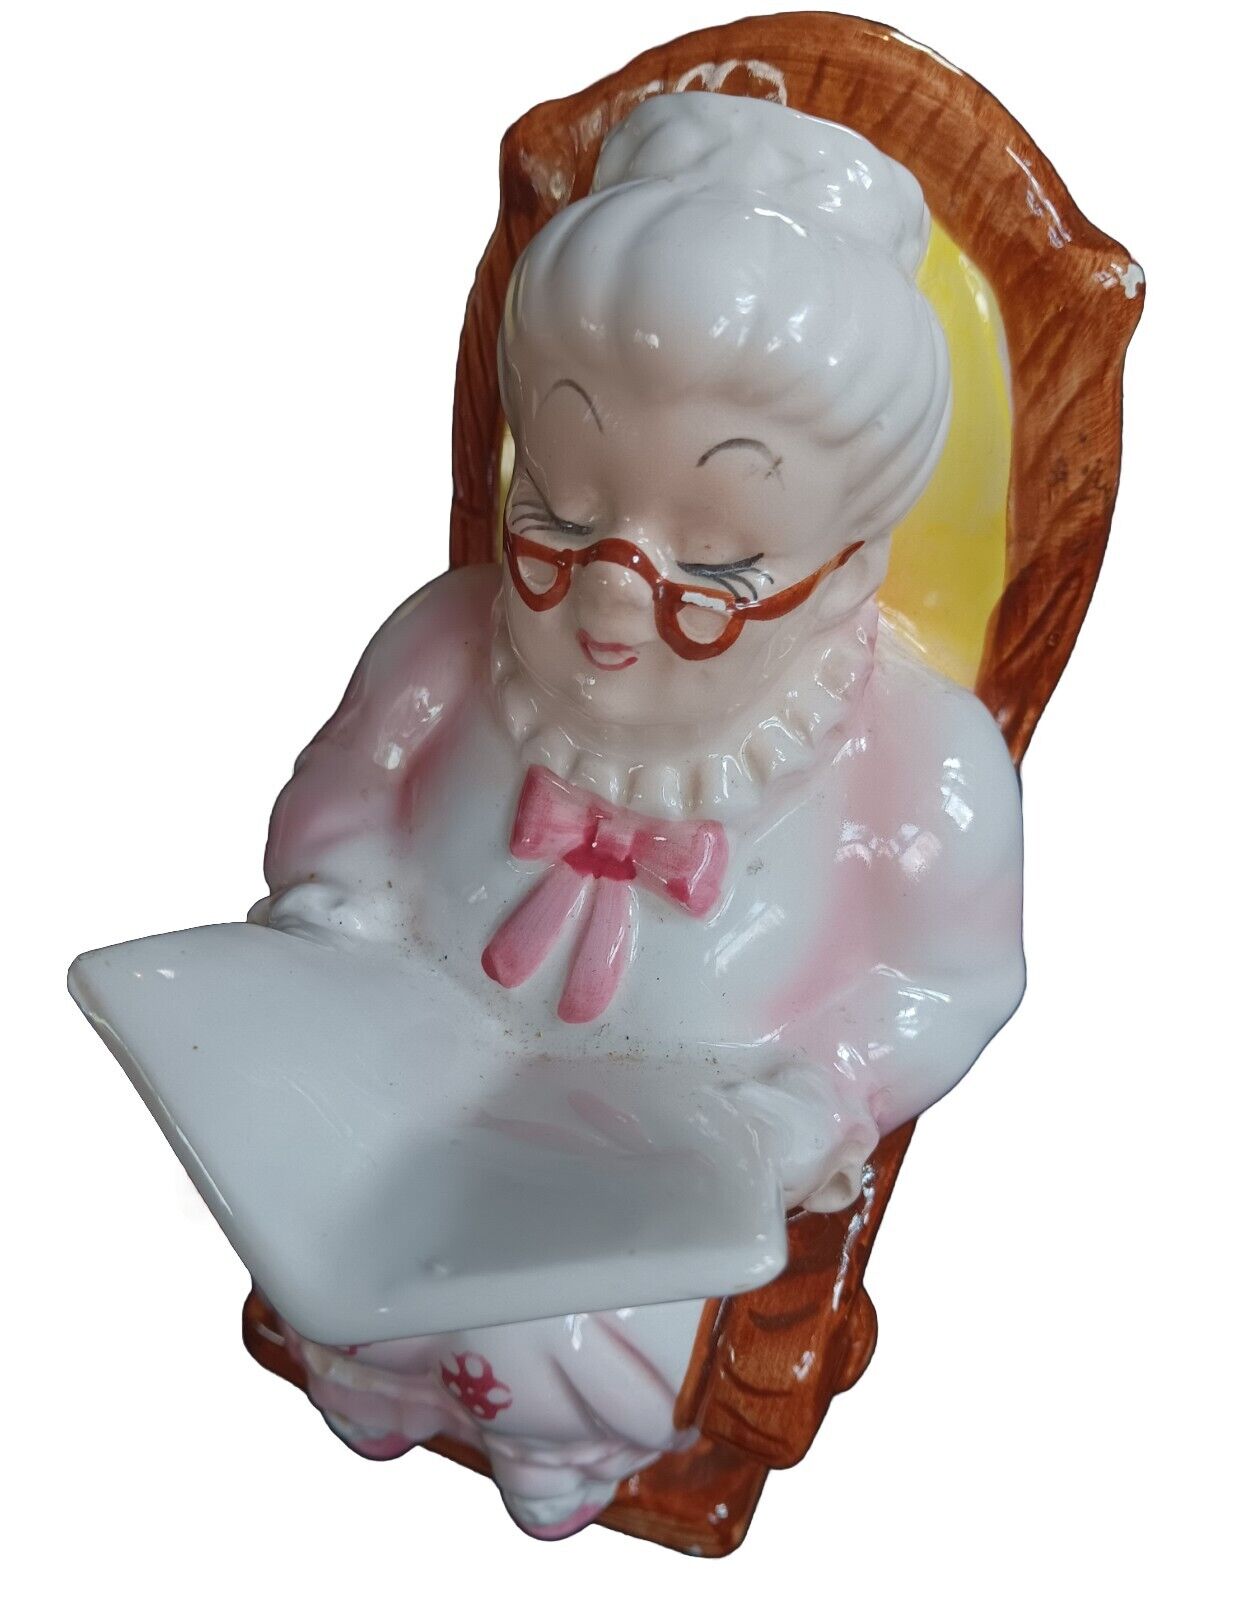 Vintage 1960\'s Retirement Fund Lefton Pottery Coin Bank Grandma in Rocking Chair